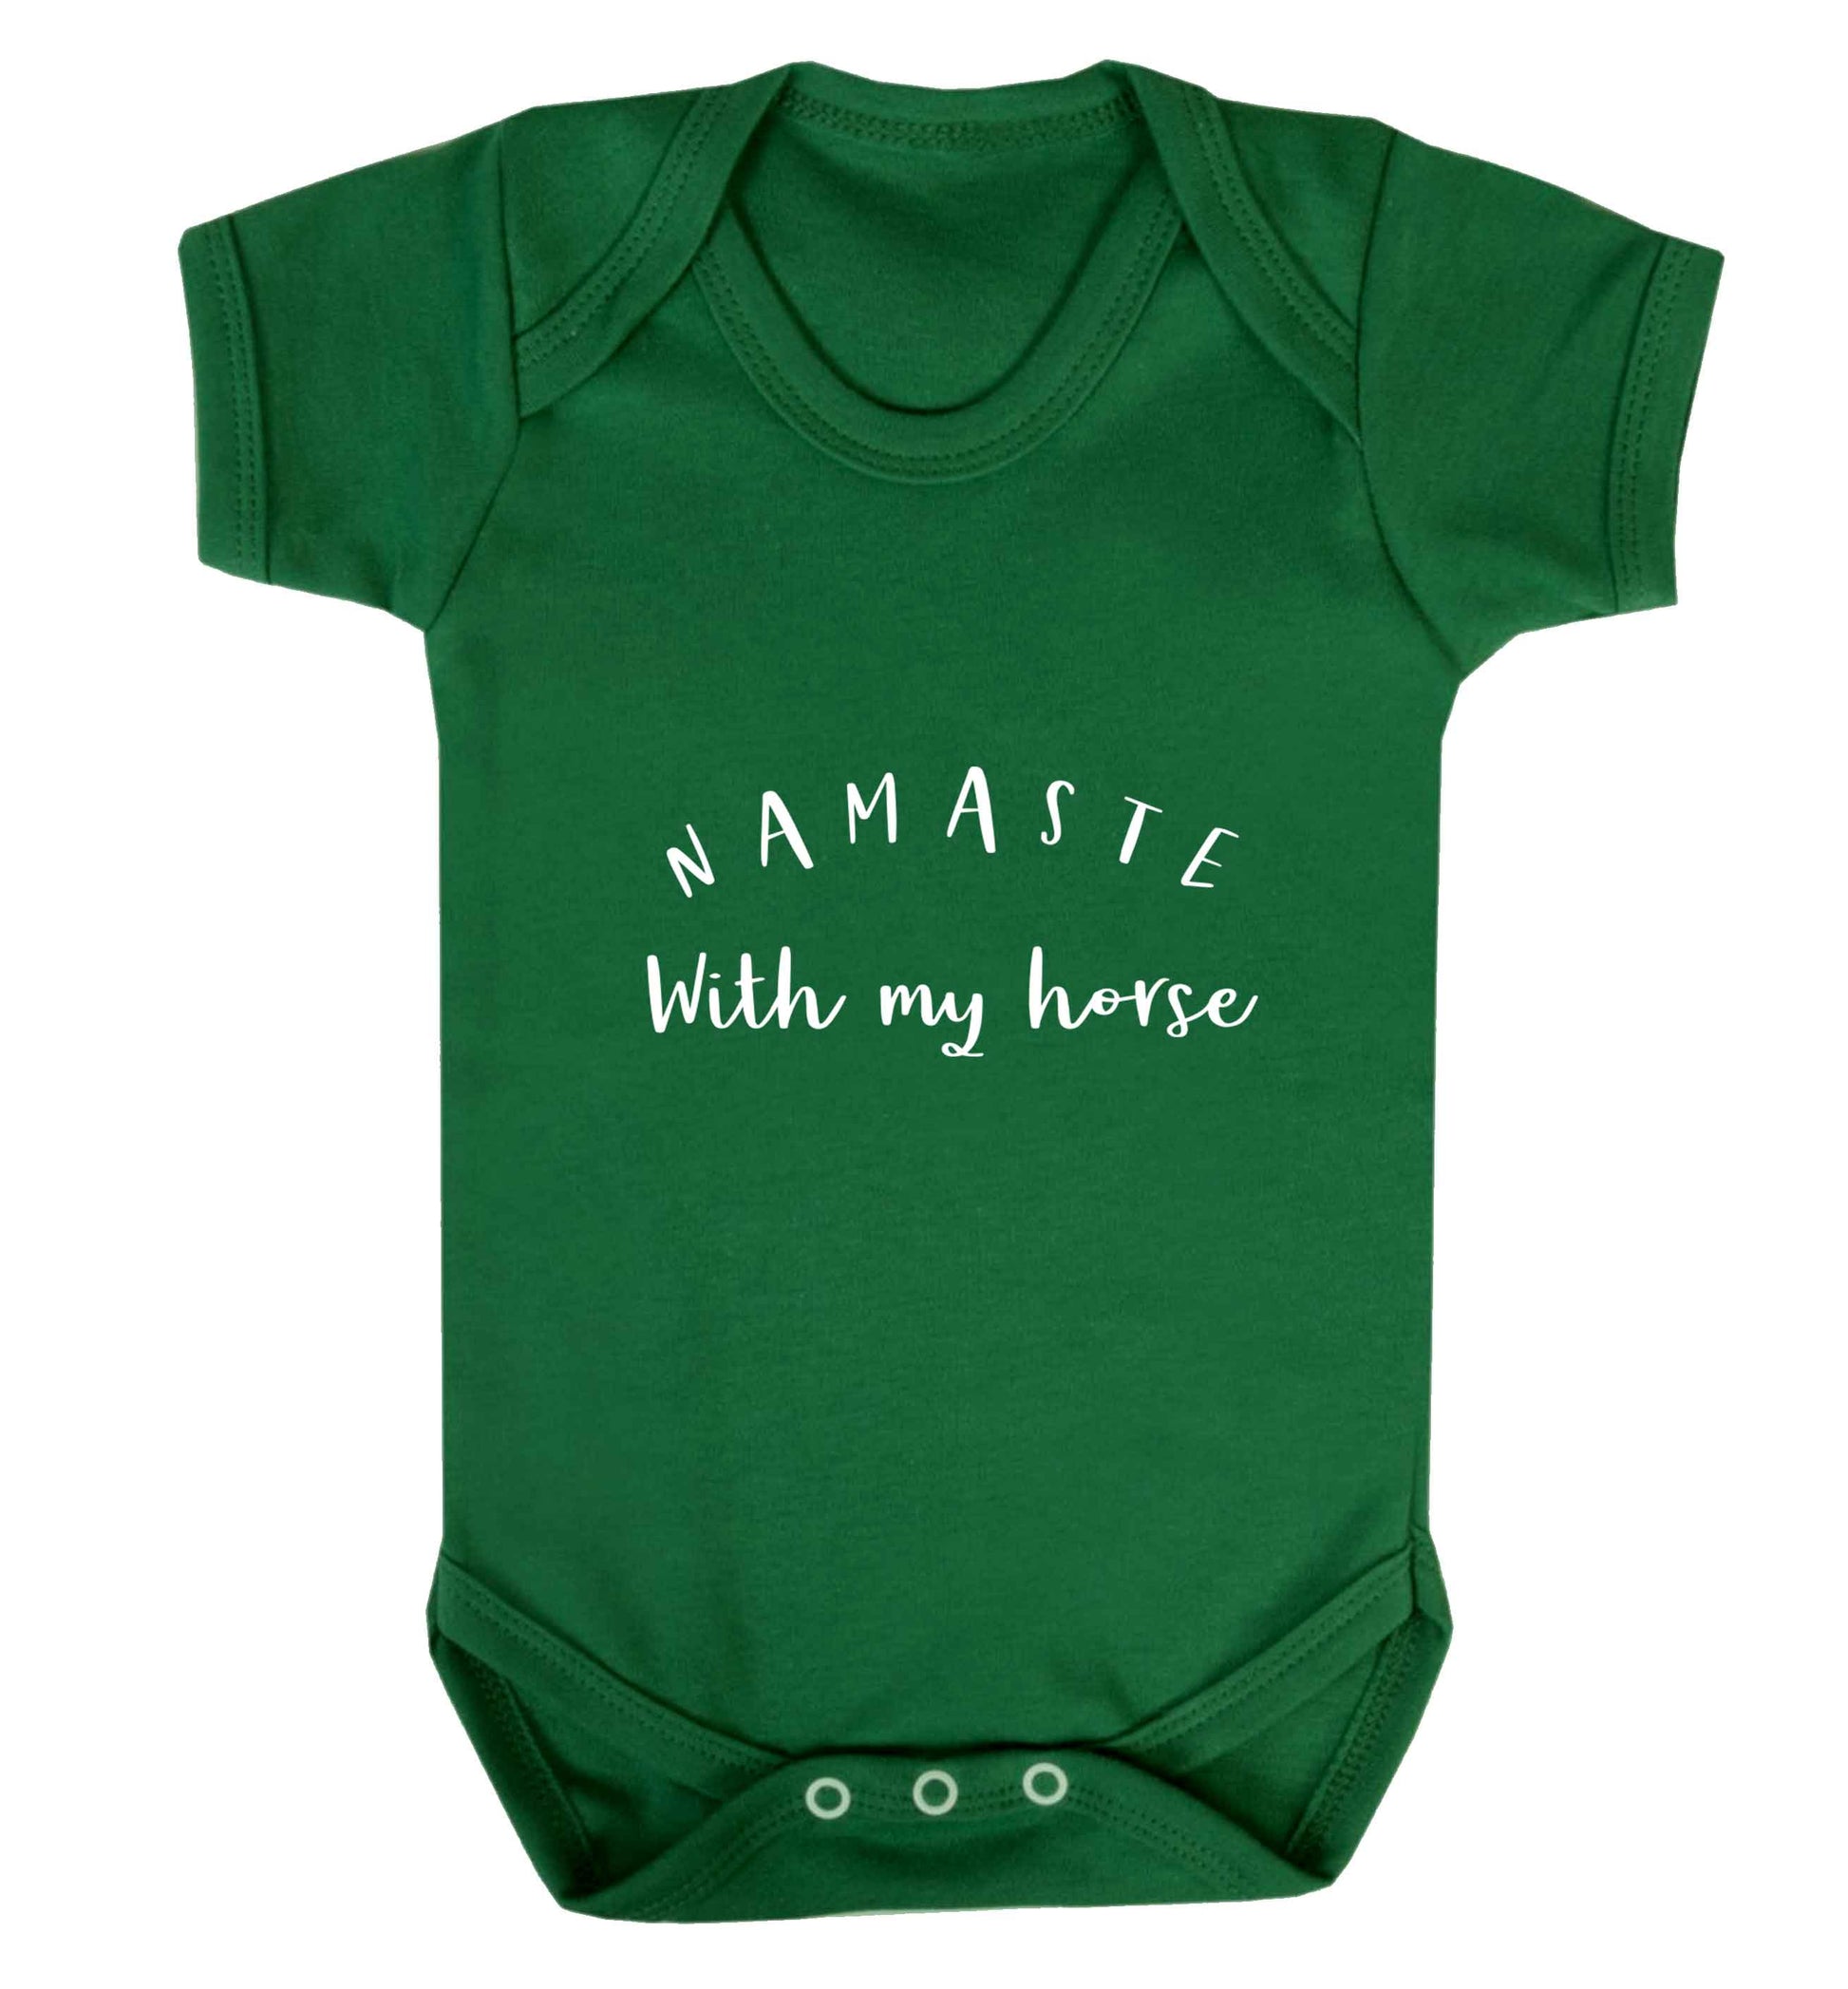 Namaste with my horse baby vest green 18-24 months